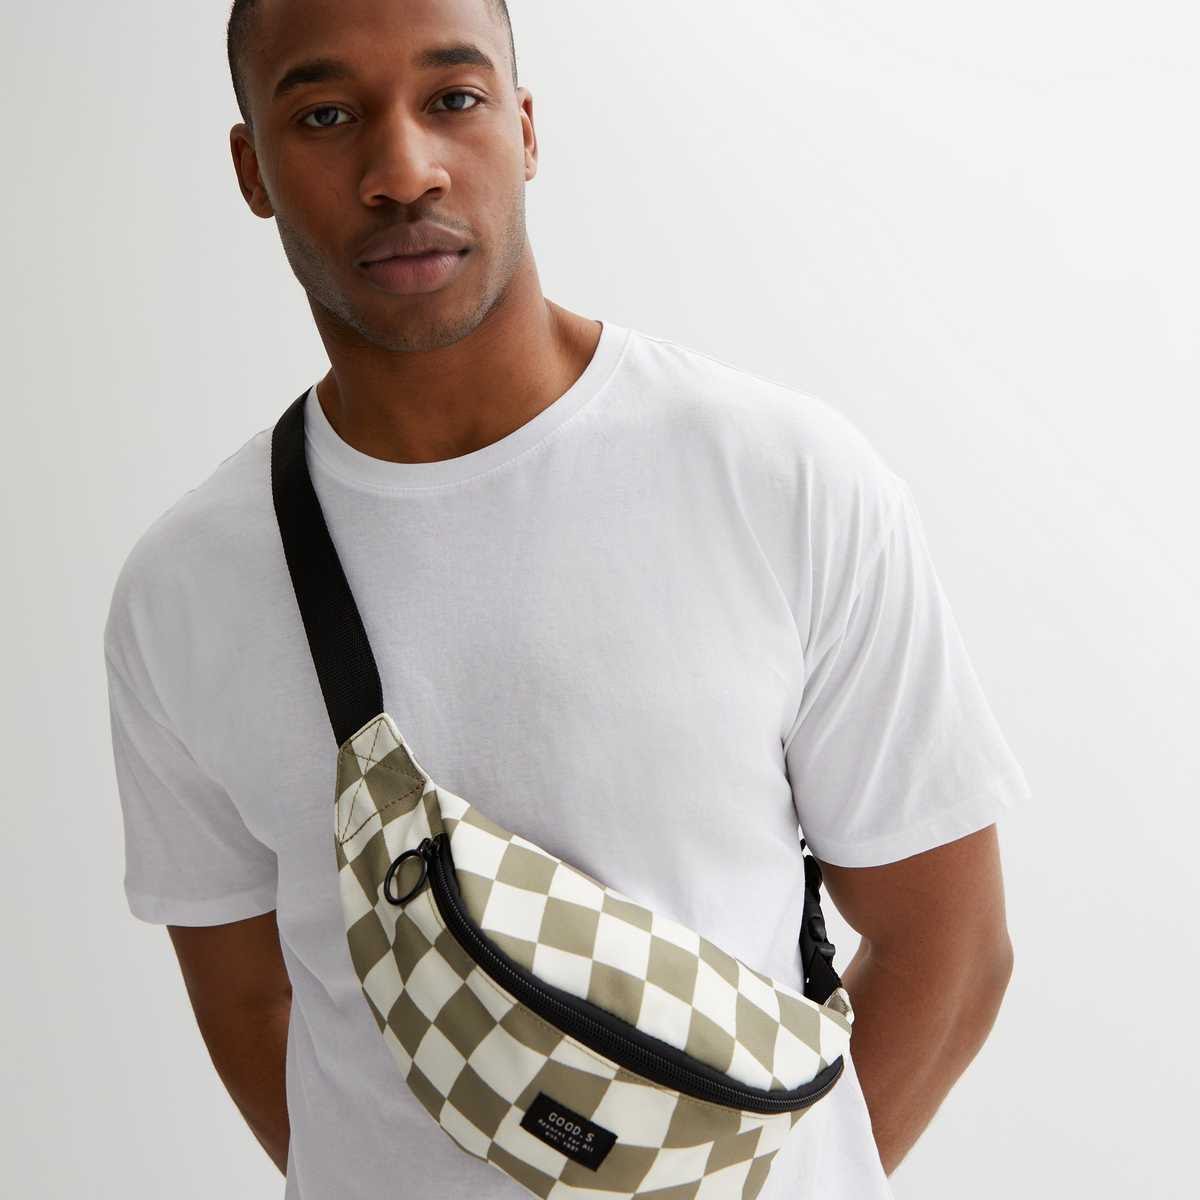 New Look, Olive Checkerboard Bum Bag, €13.49